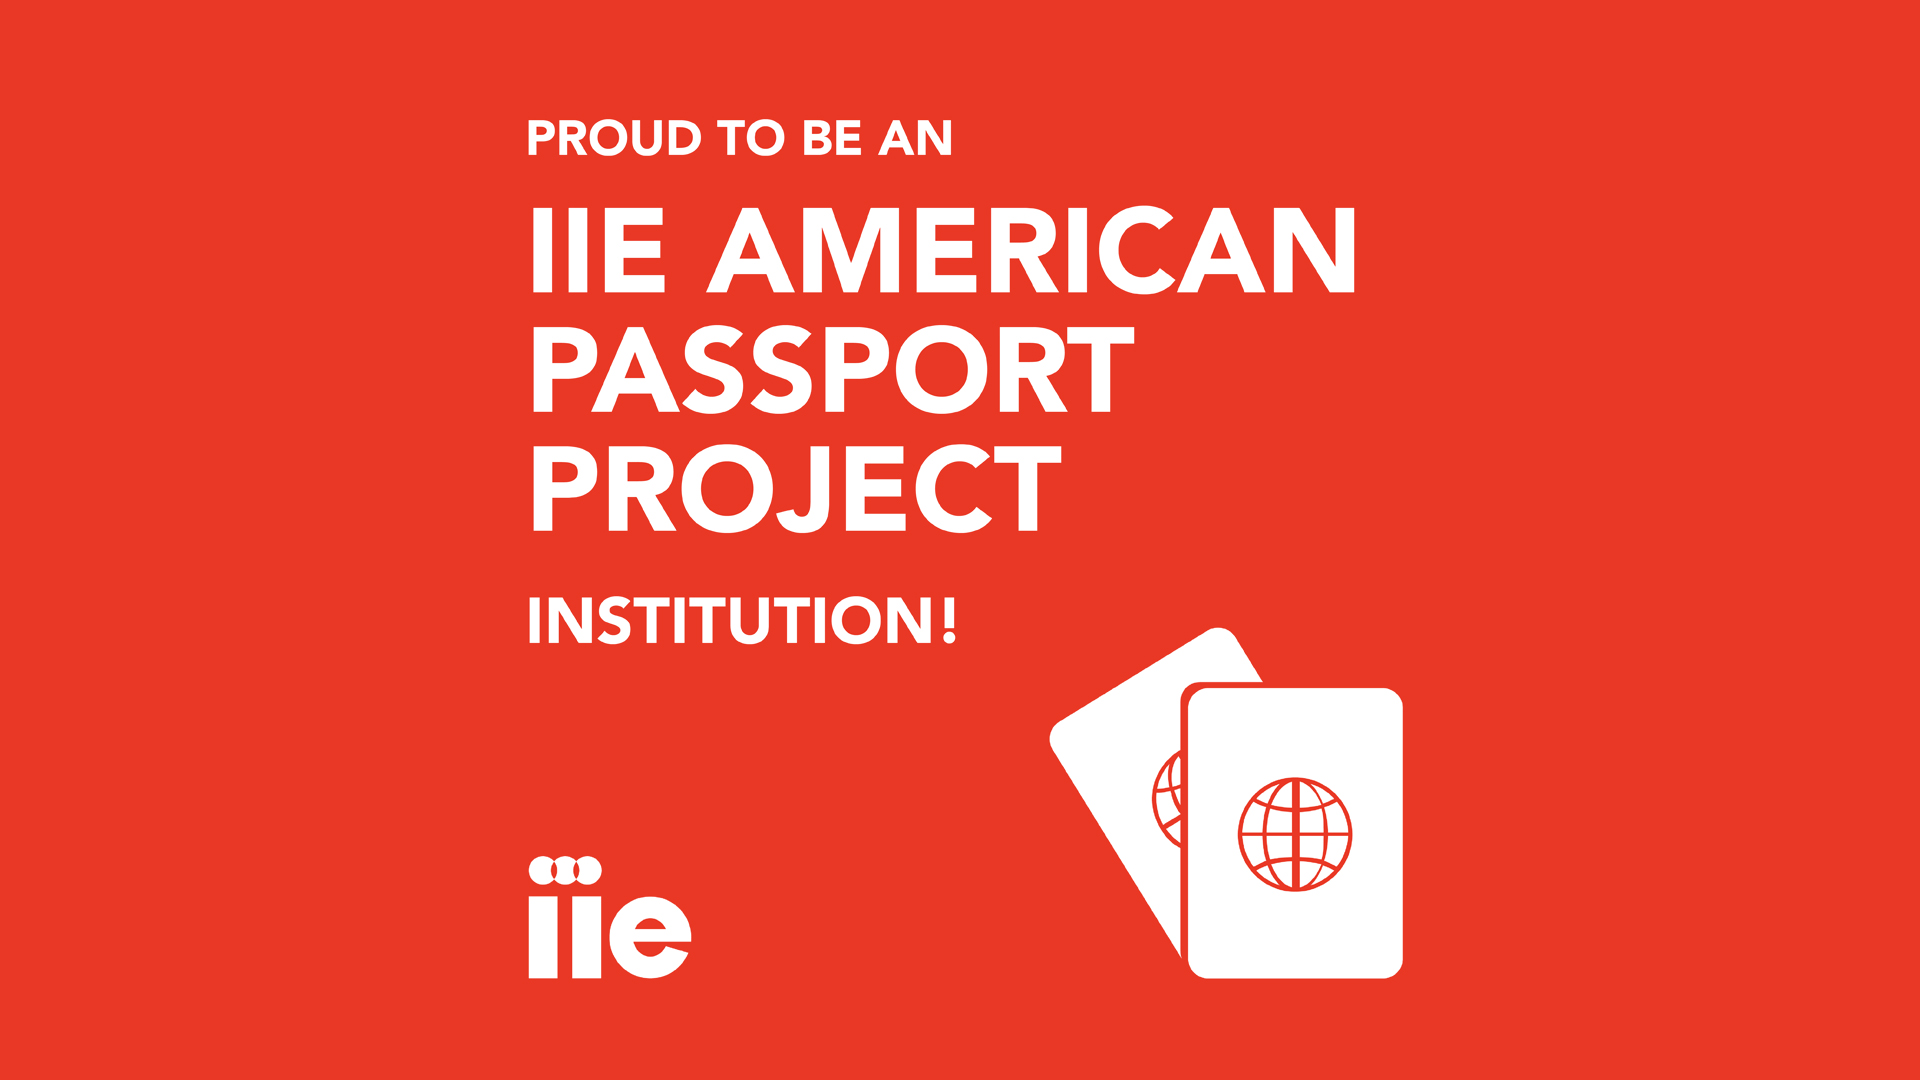 Davidson-Davie Selected to Receive the IIE American Passport Project Grant